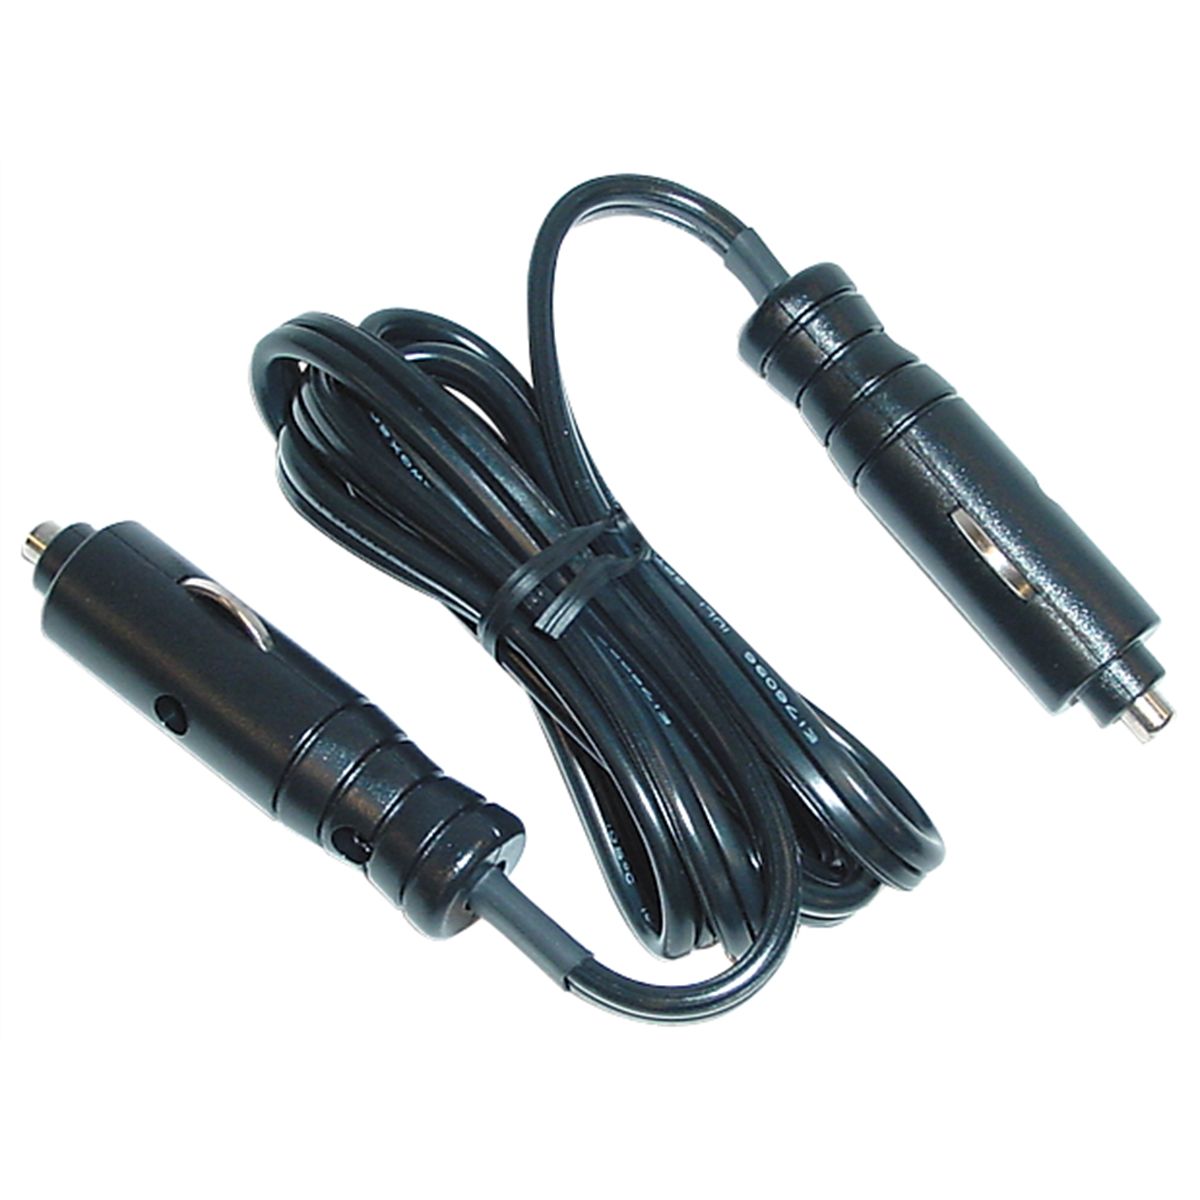 Male-Male 12V Extension Cord